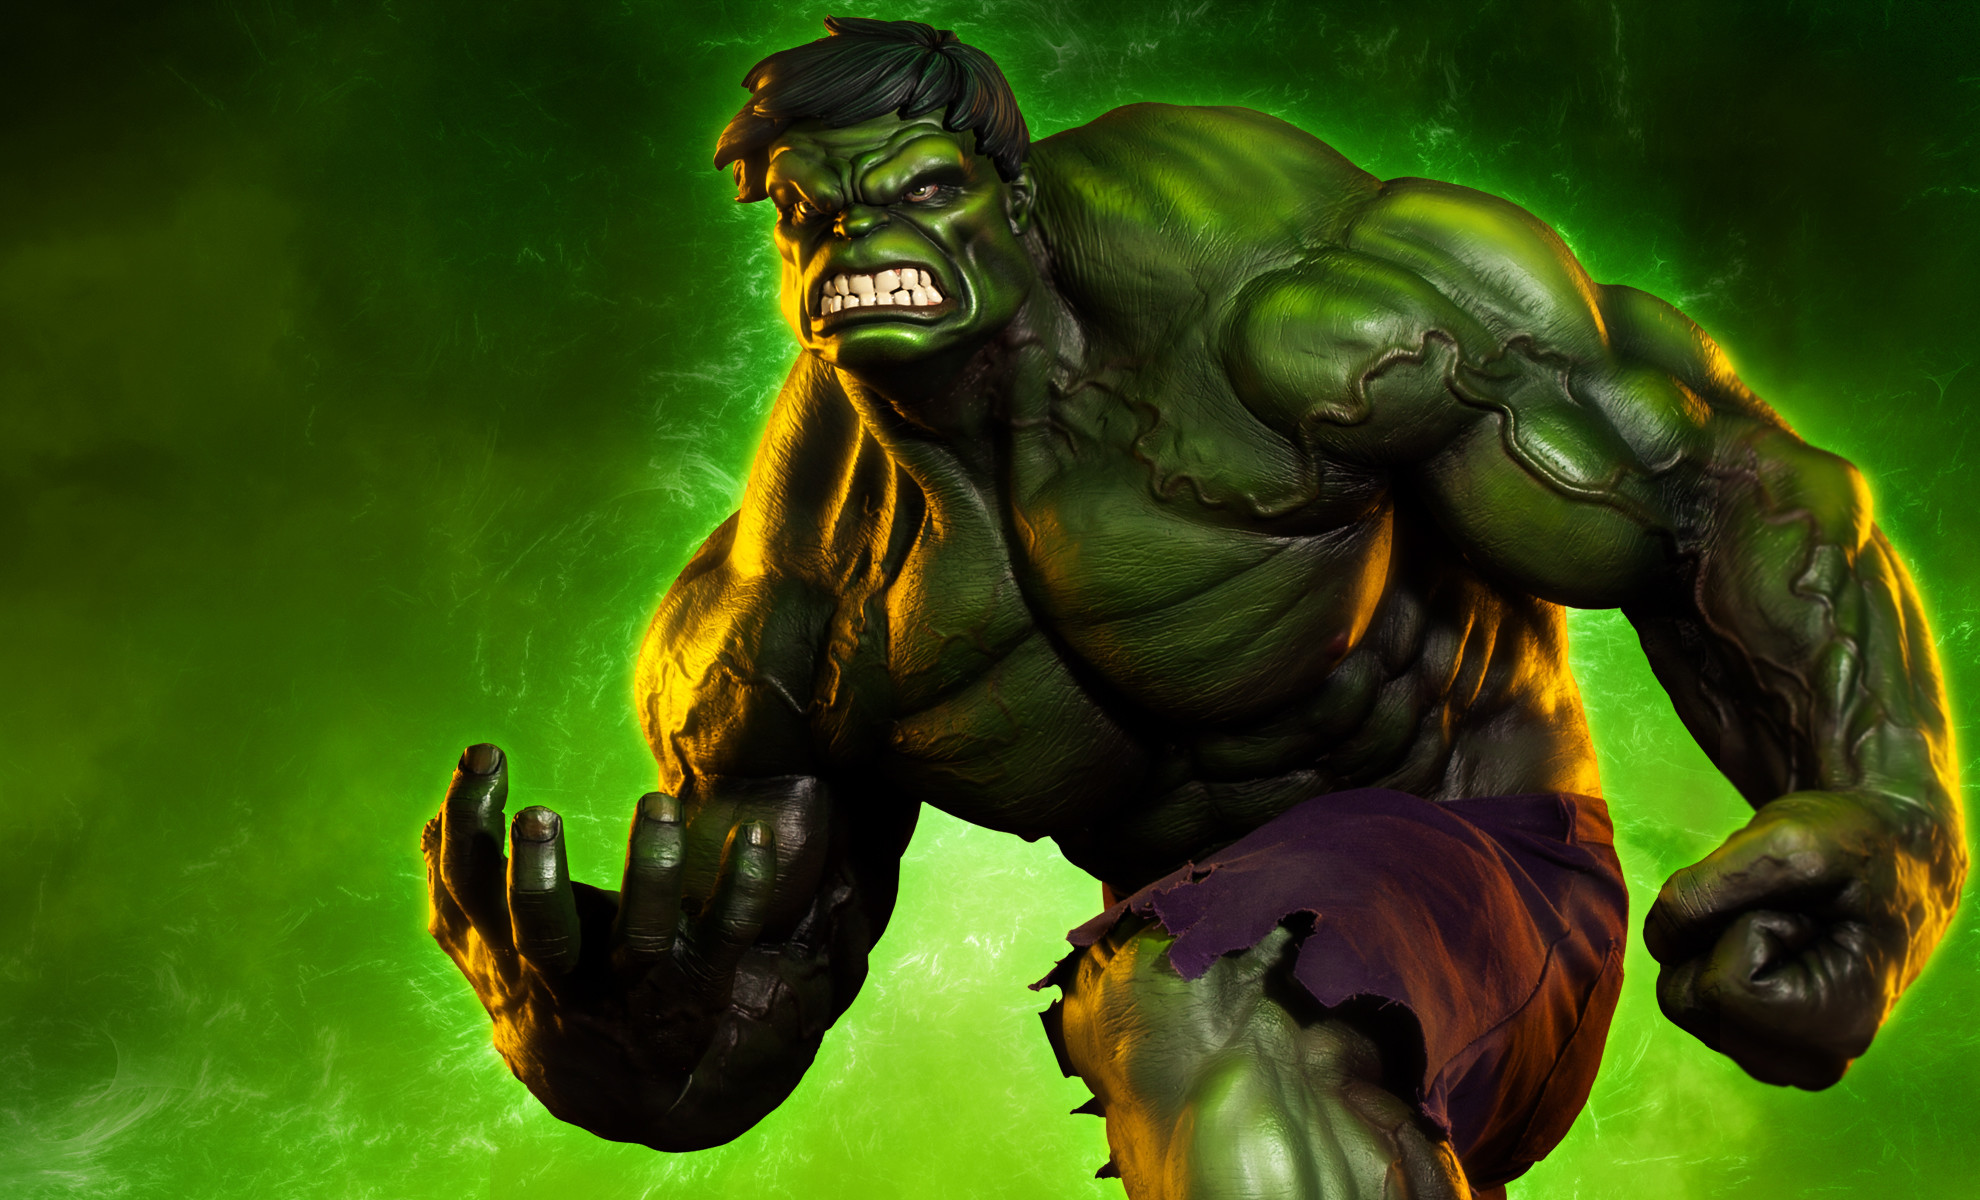 1980x1200 Incredible Hulk Live Wallpaper For Android